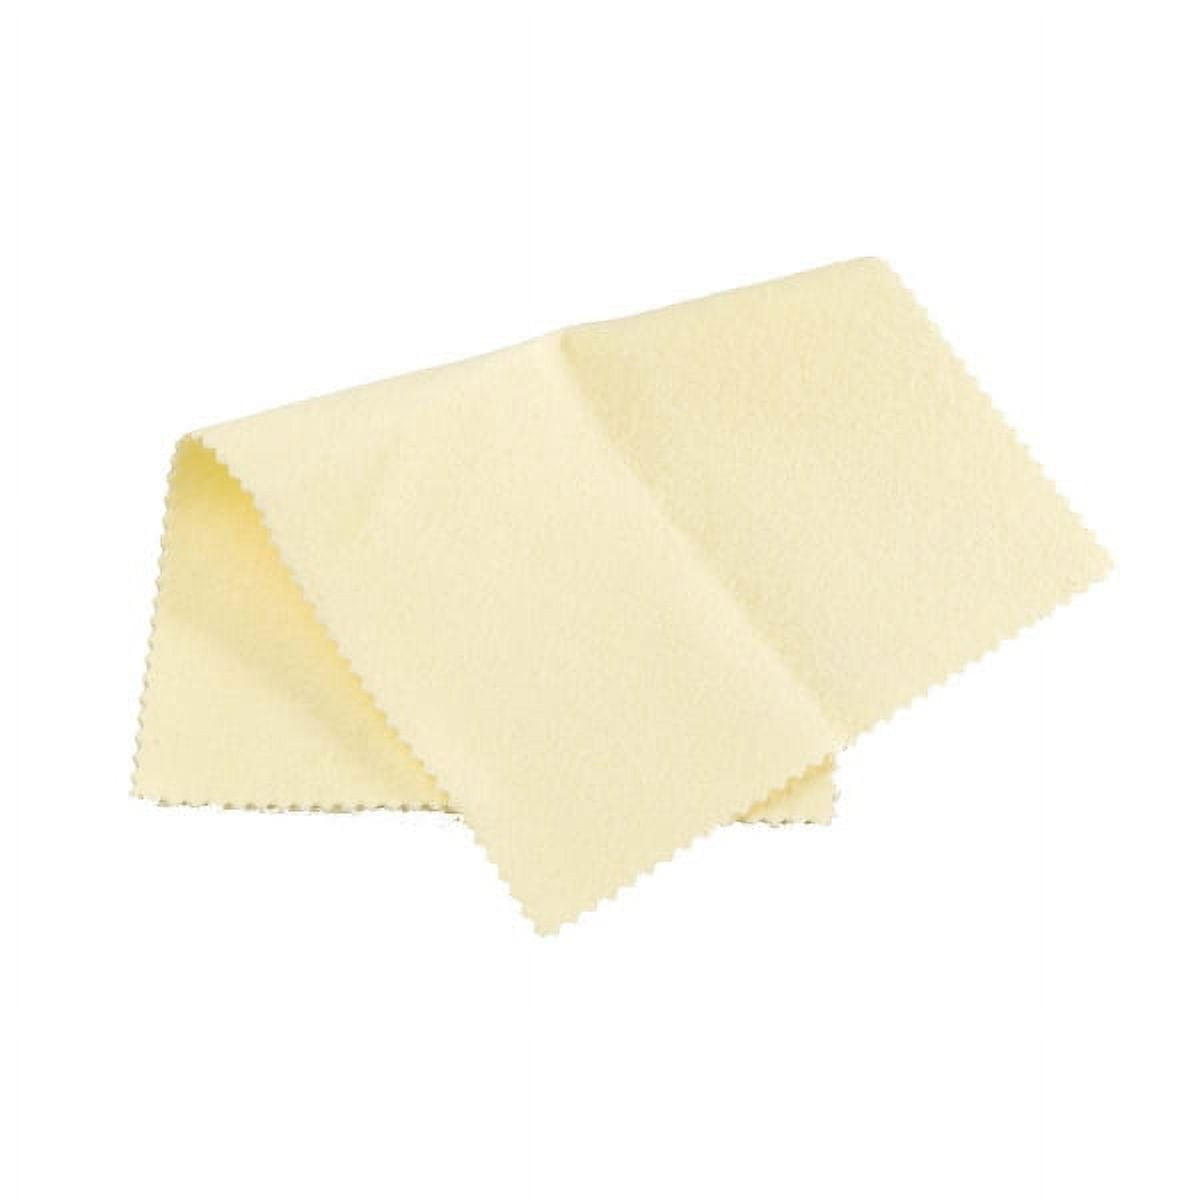 Sunshine Polishing Cloths, Bulk Pack, for Silver, Gold, Brass and Copper  Jewelry (5 Pack)